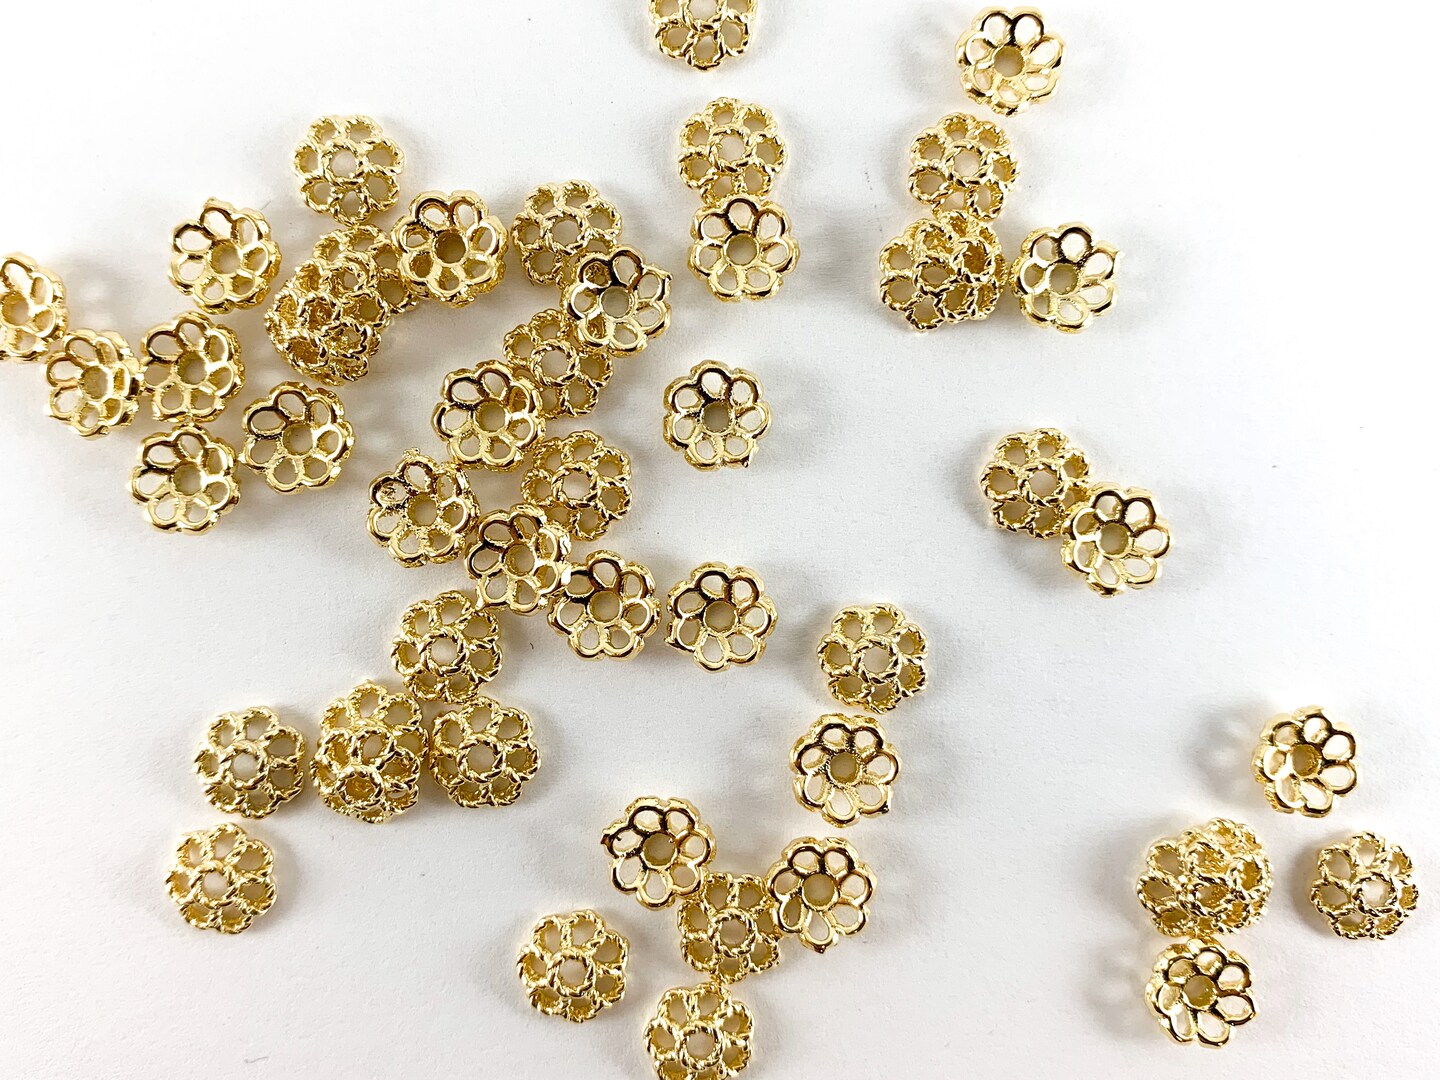 18K Gold Plated Flower Bead Caps 6mm in Brass 10pcs | Michaels